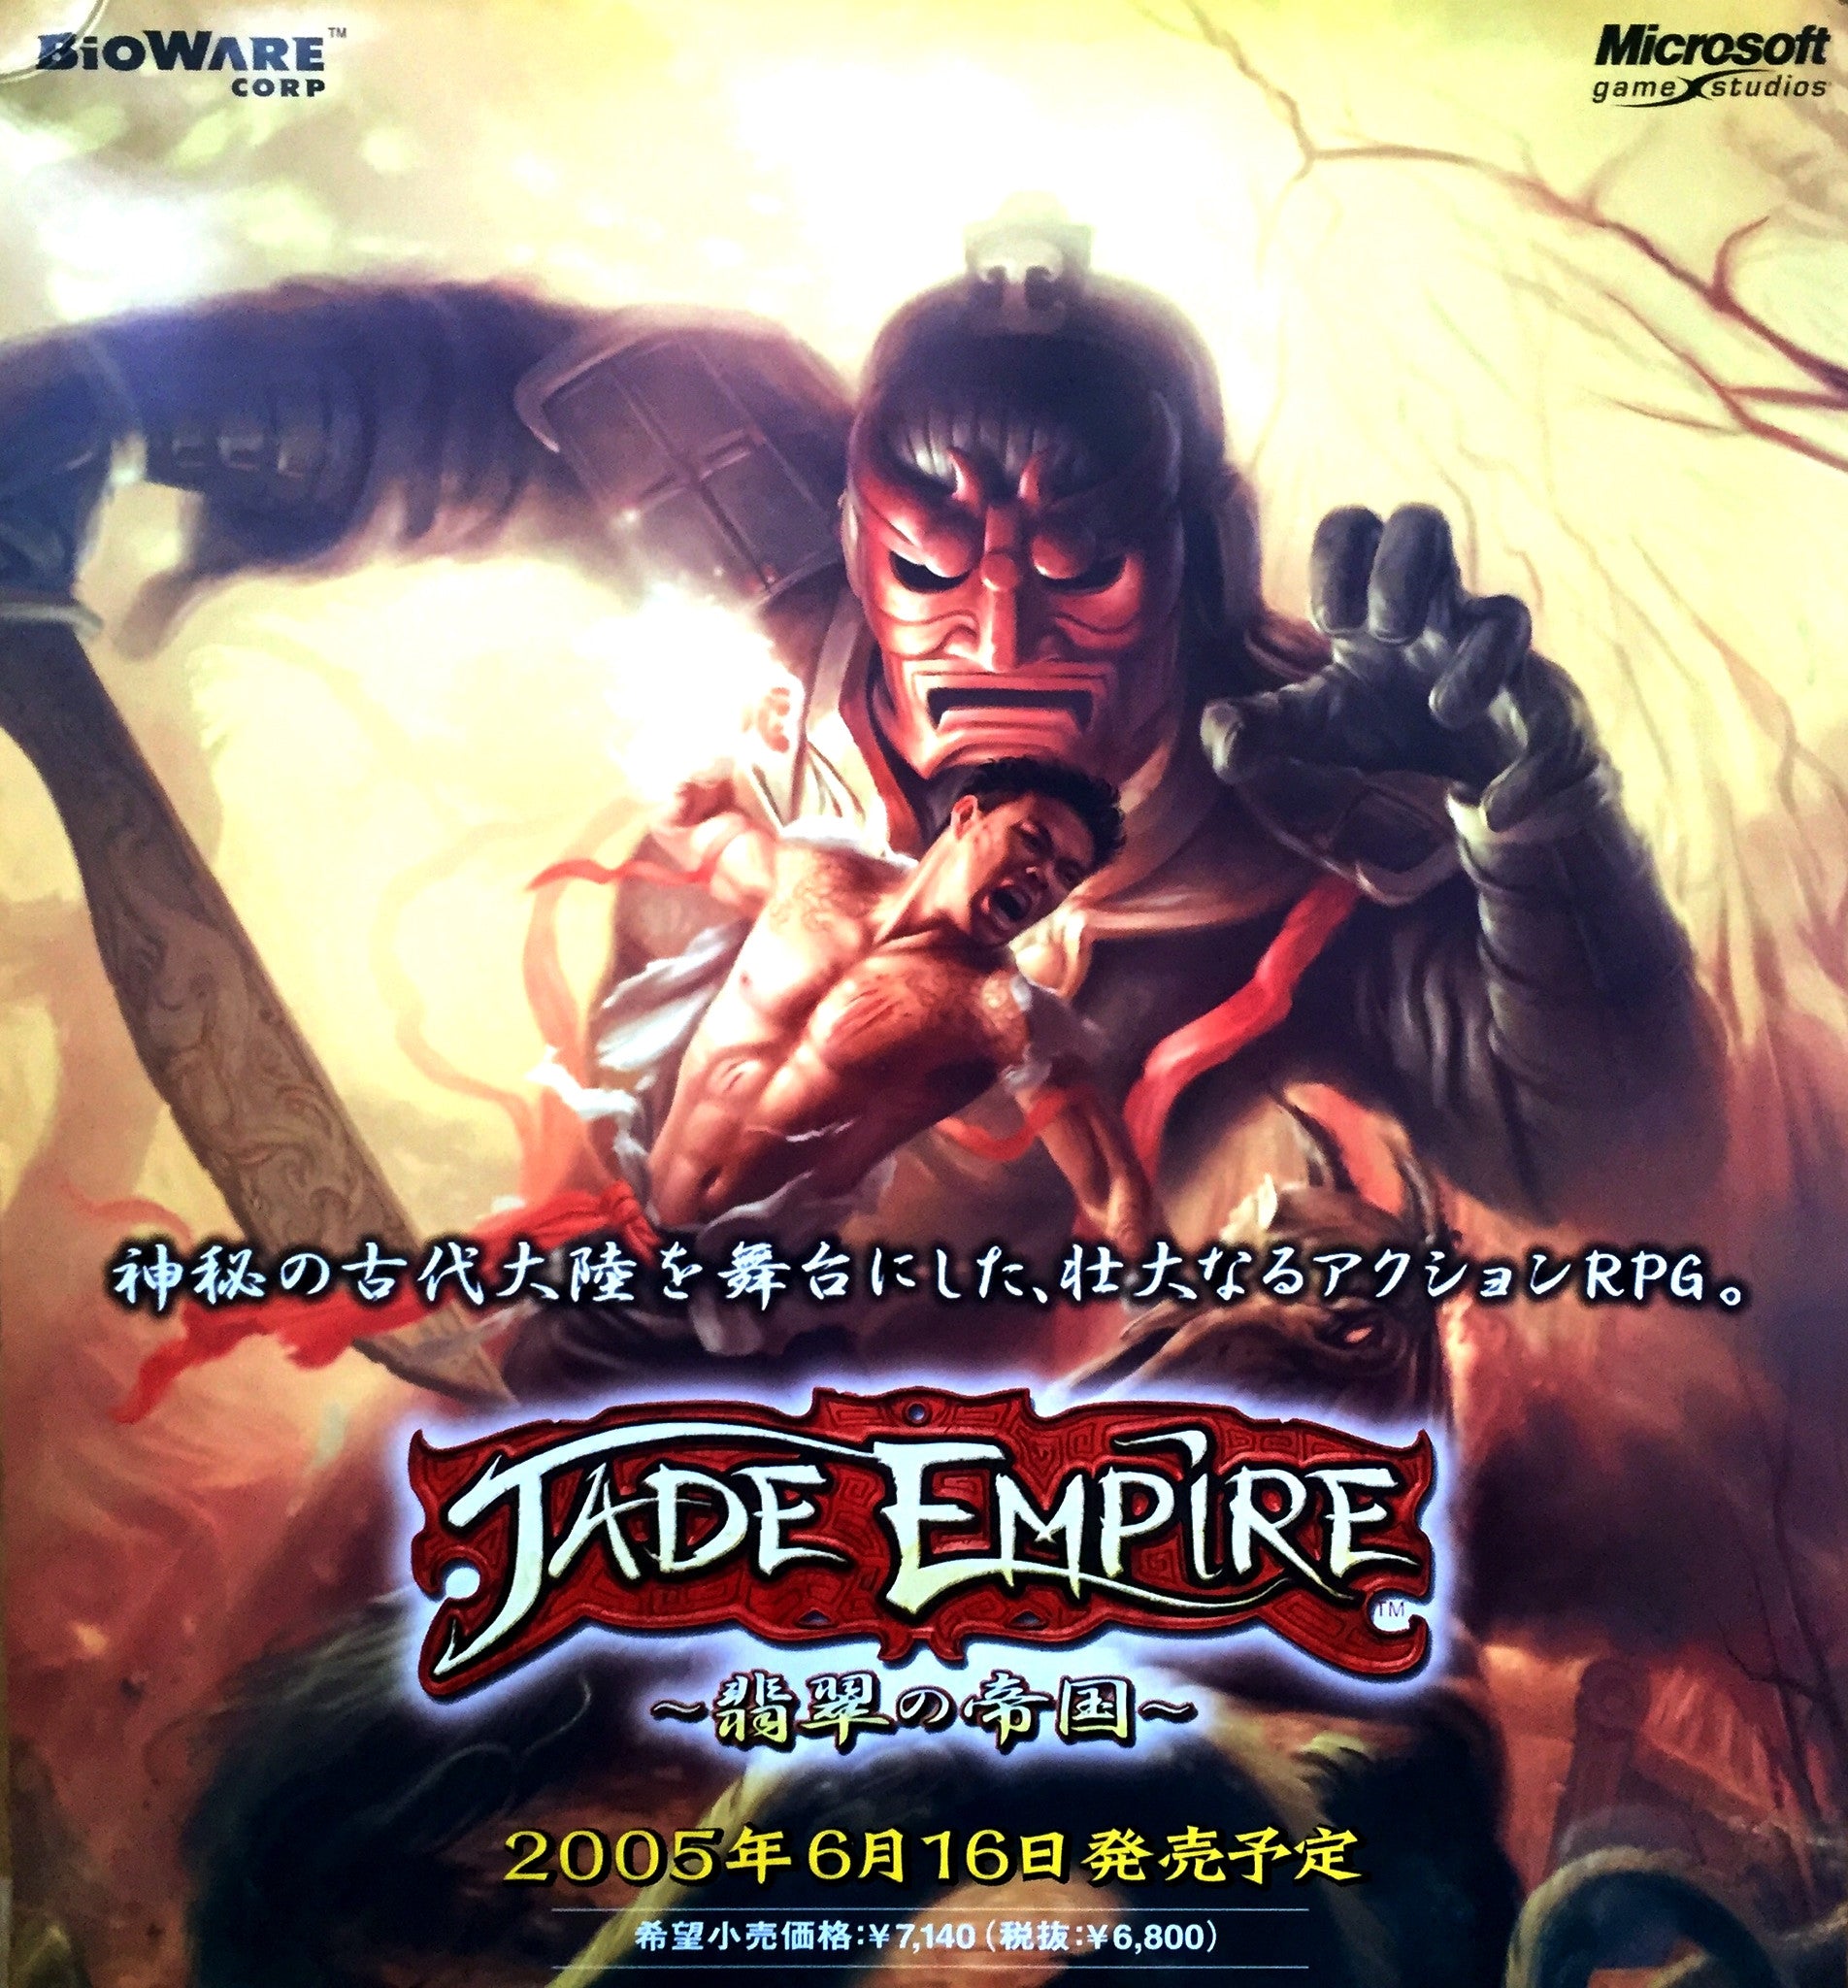 Jade Empire (B2) Japanese Promotional Poster